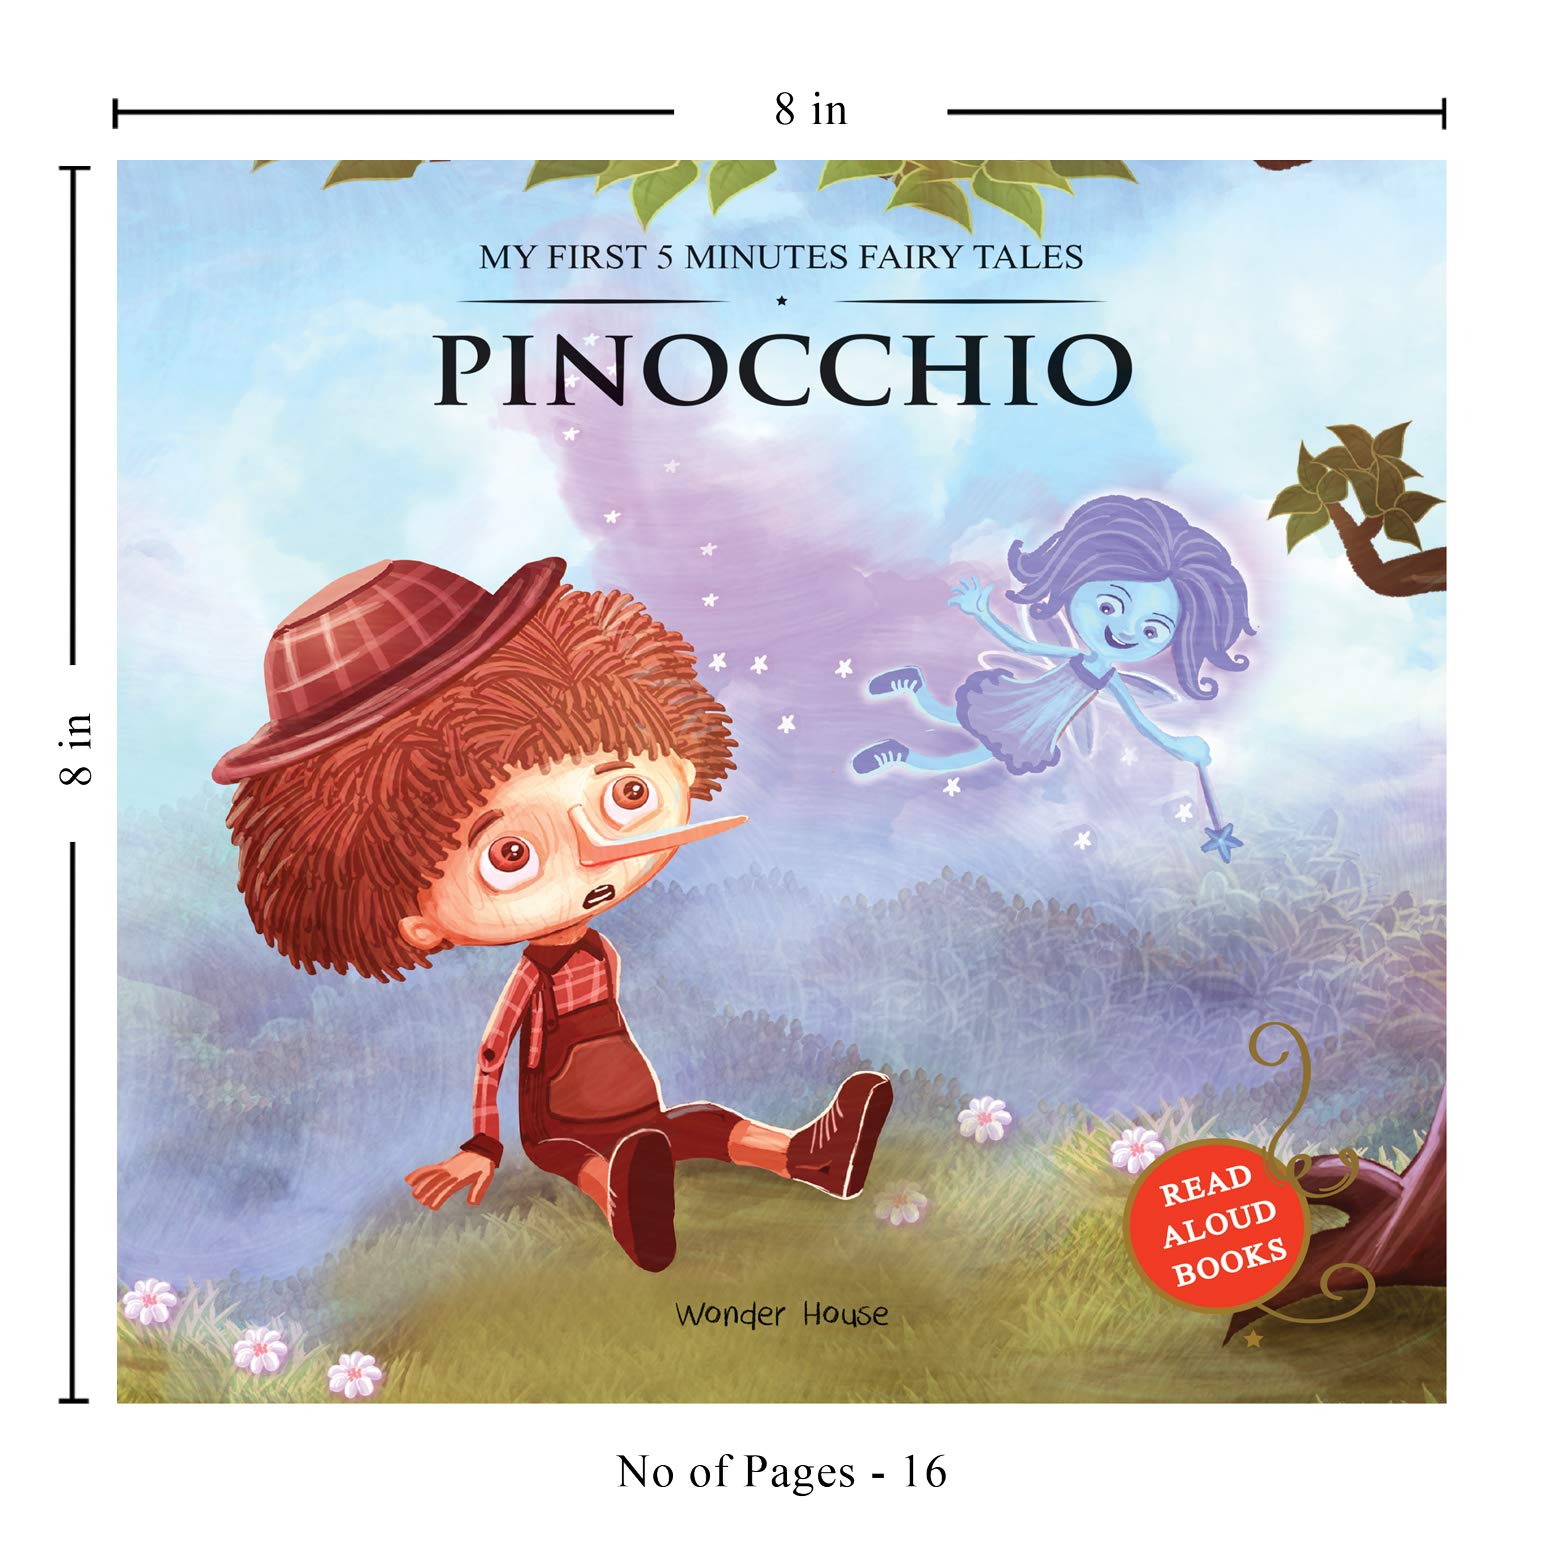 My First 5 Minutes Fairy Tales: Pinocchio